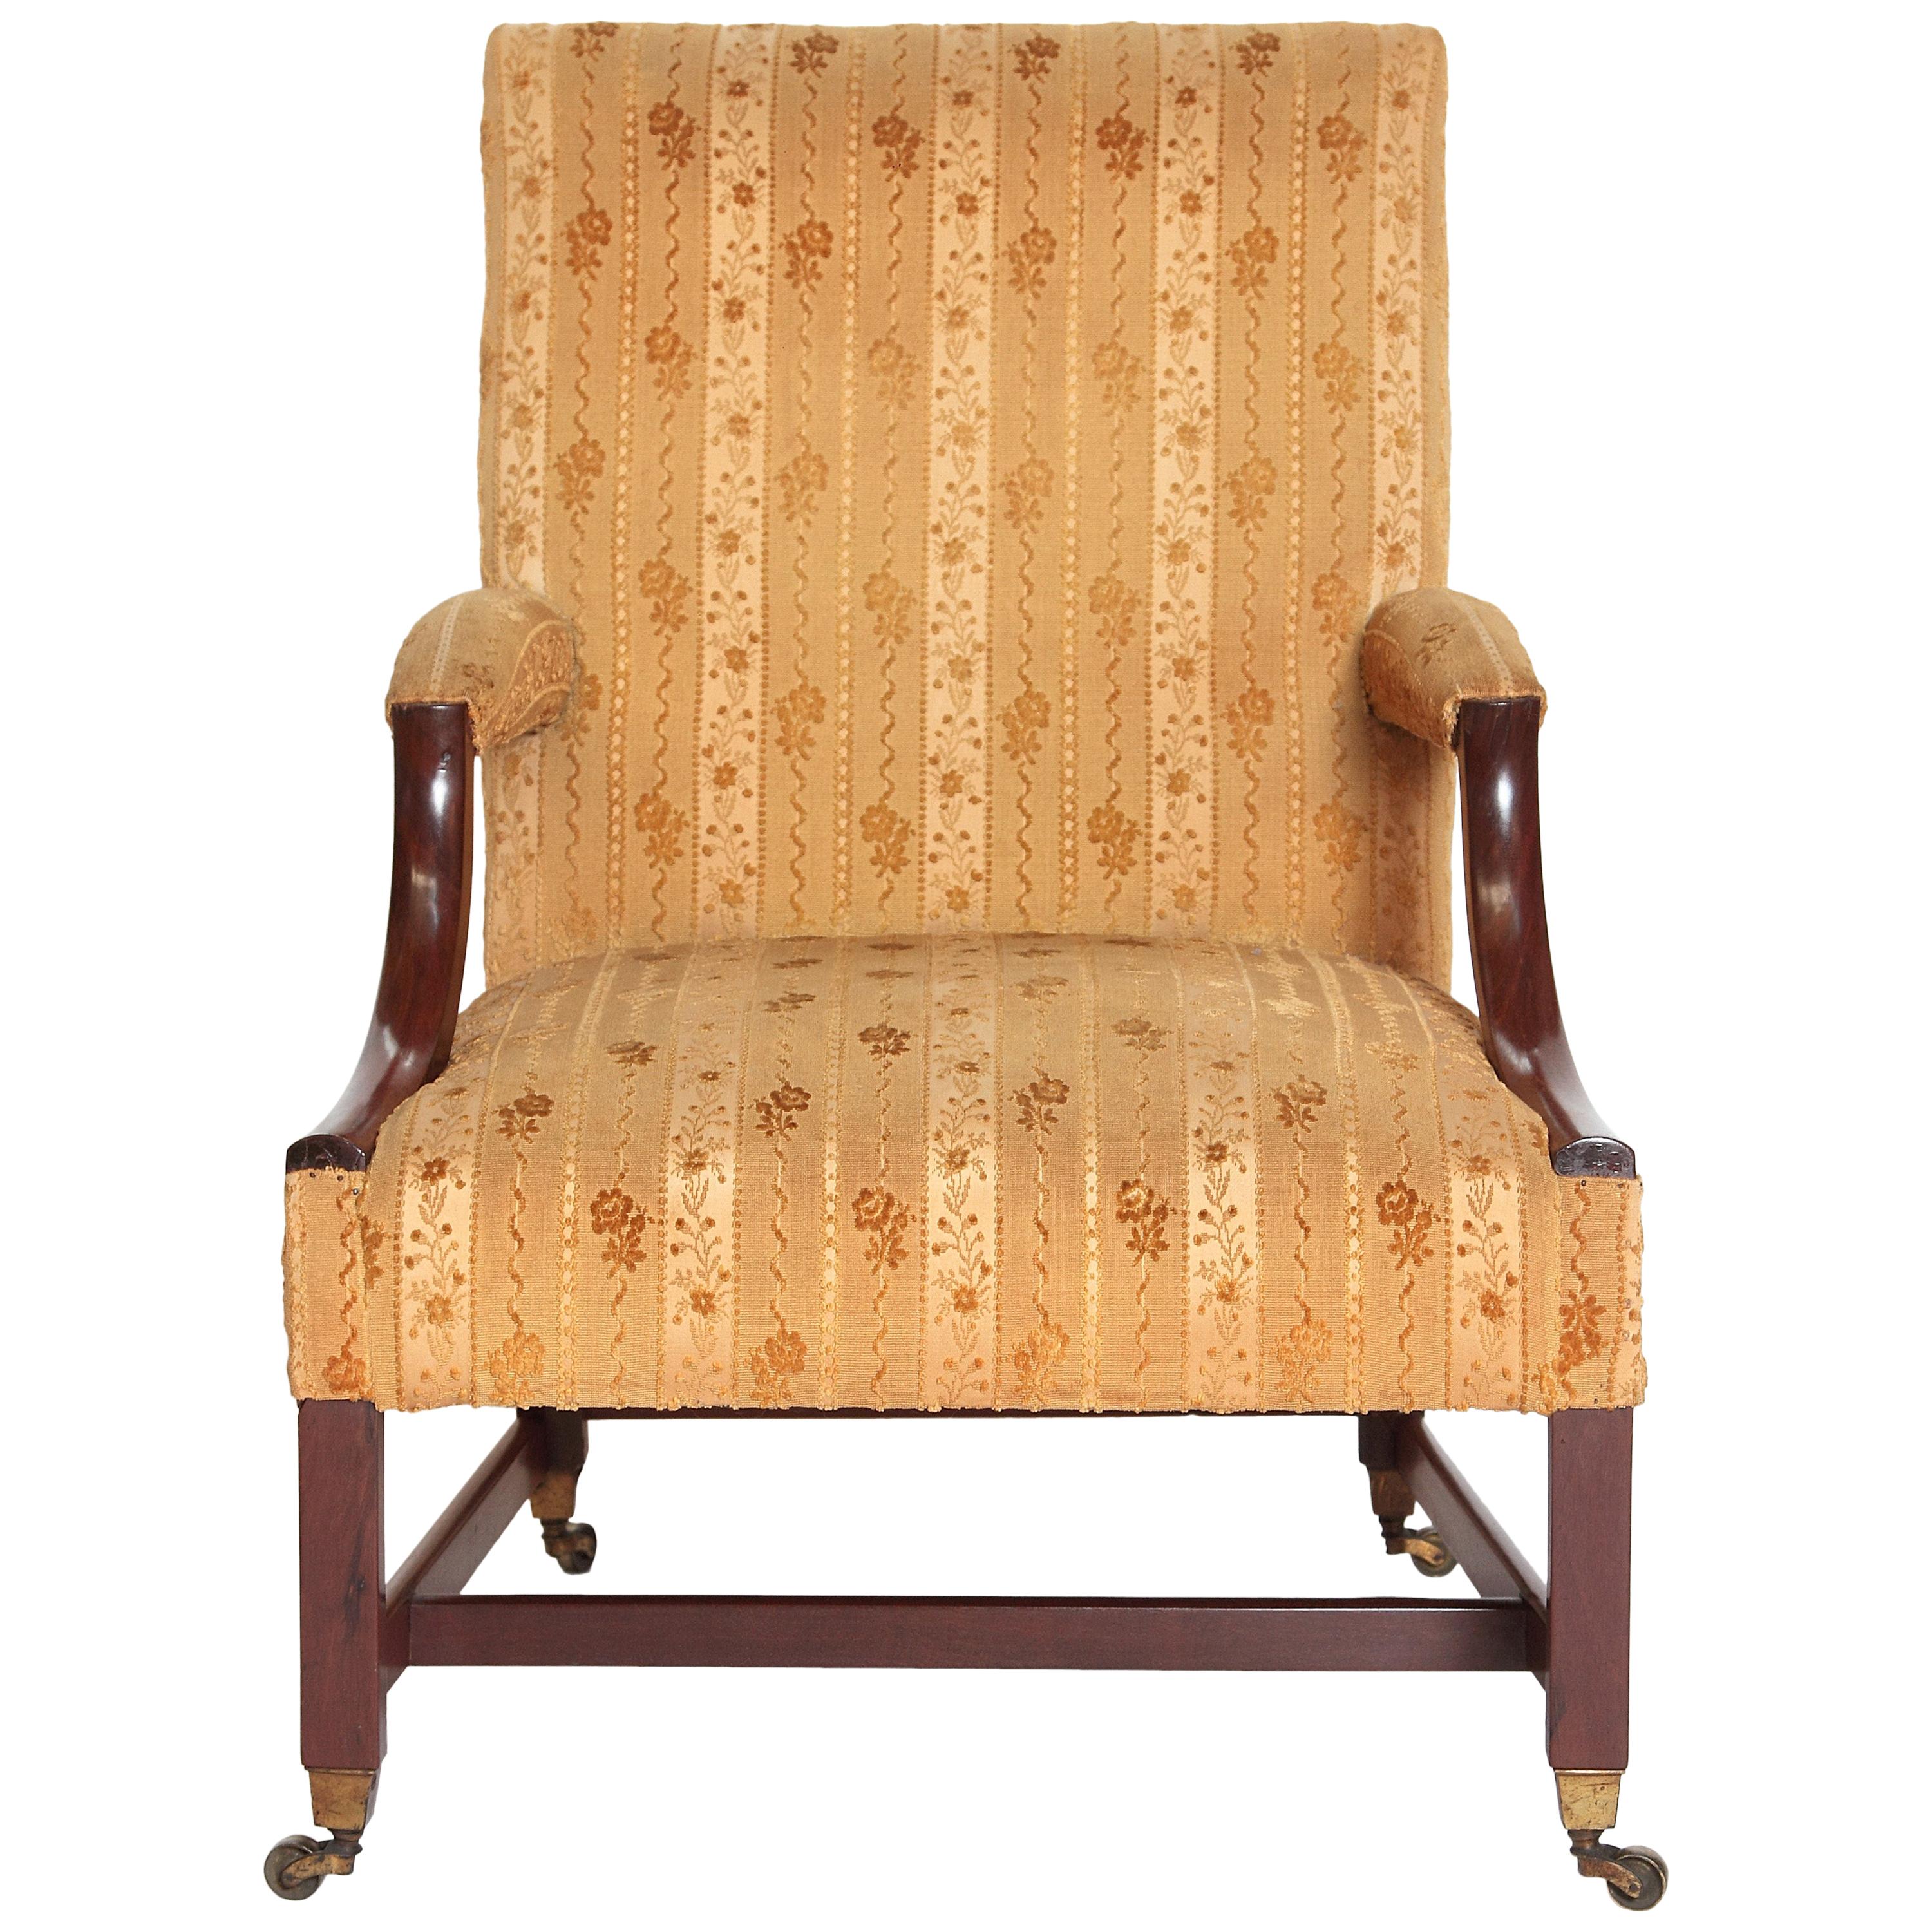 18th Century George III Upholstered "Gainsborough" Library Chair